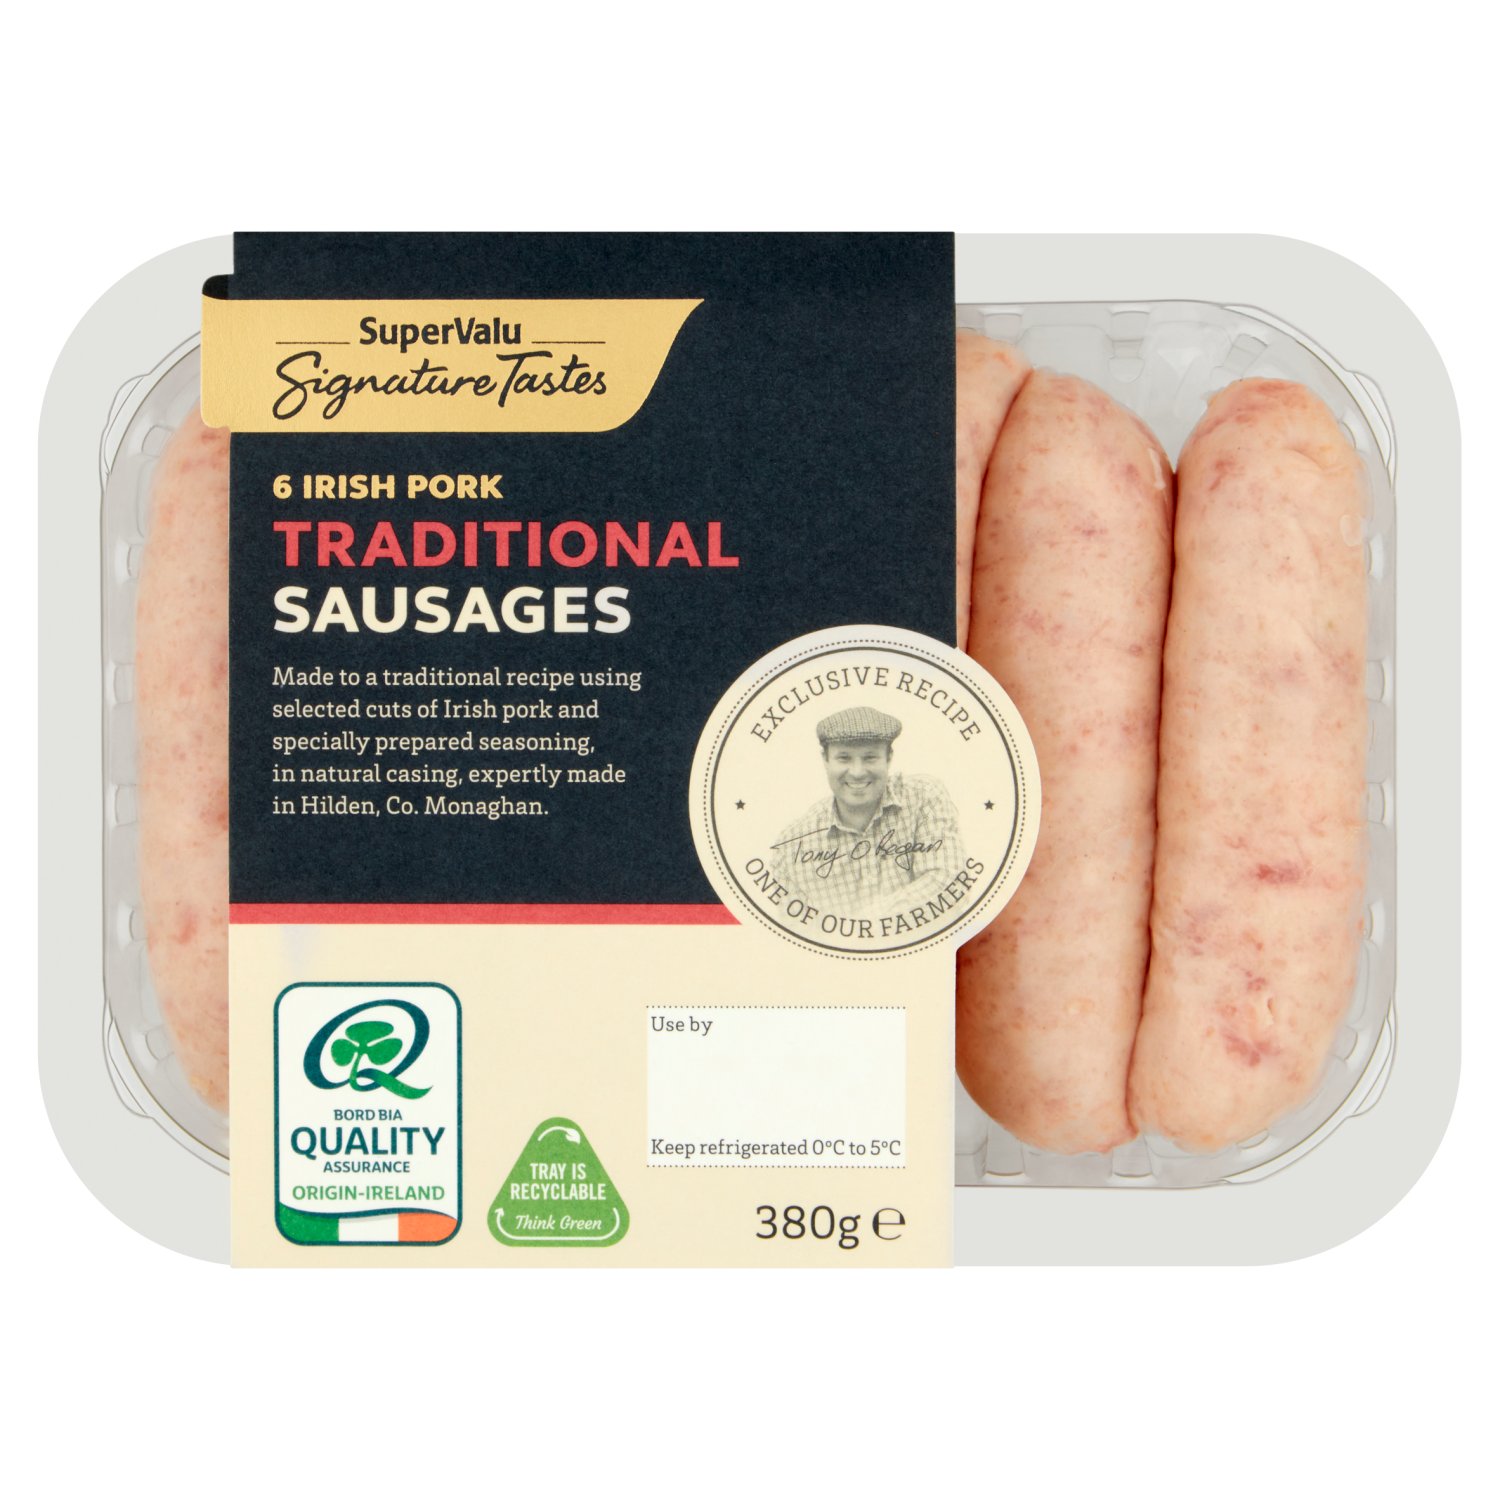 Made to a traditional recipe using selected cuts of Irish pork and specially prepared seasoning, in natural casing, expertly made in Hilden, Co. Monaghan.

The art of making delicious sausages has been handed down within Mallon's in County Monaghan for generations, and the recipes used today are crafted by years of expert experience. These traditional Irish pork sausages were made with selected cuts and a mild spice mixture, using a slow-blend process to create a full texture and flavour.